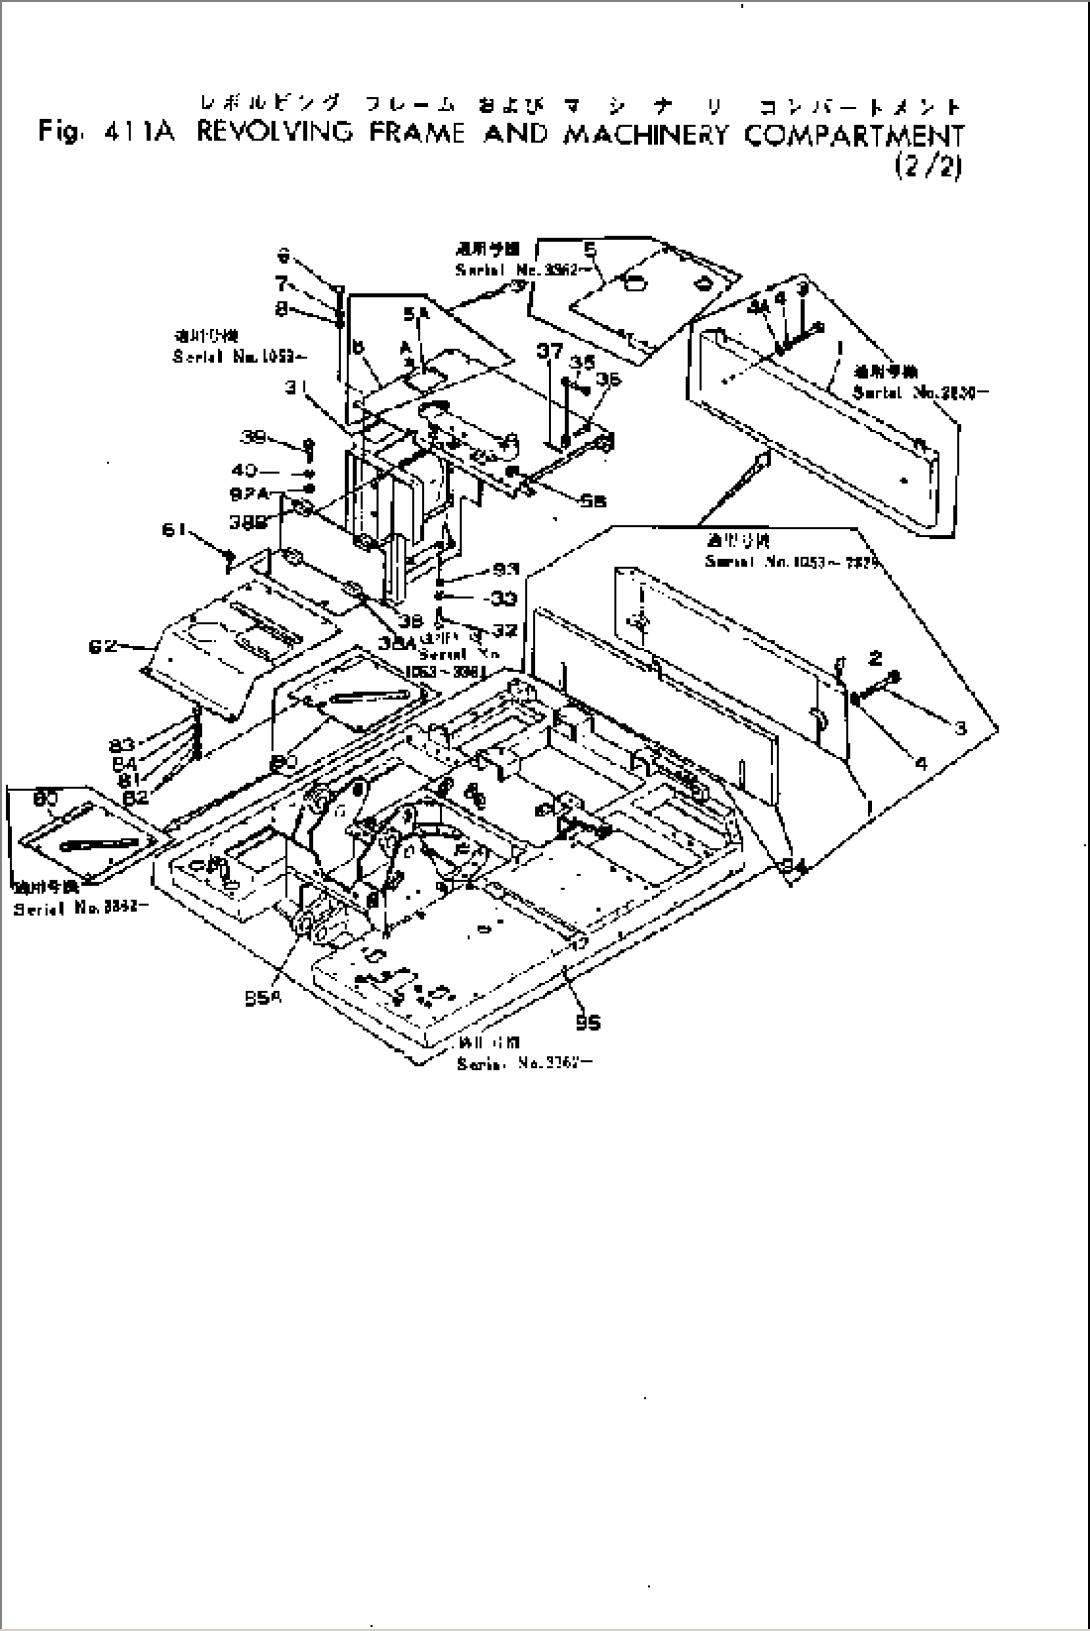 REVOLVING FRAME AND MACHINERY COMPARTMENT (2/2)